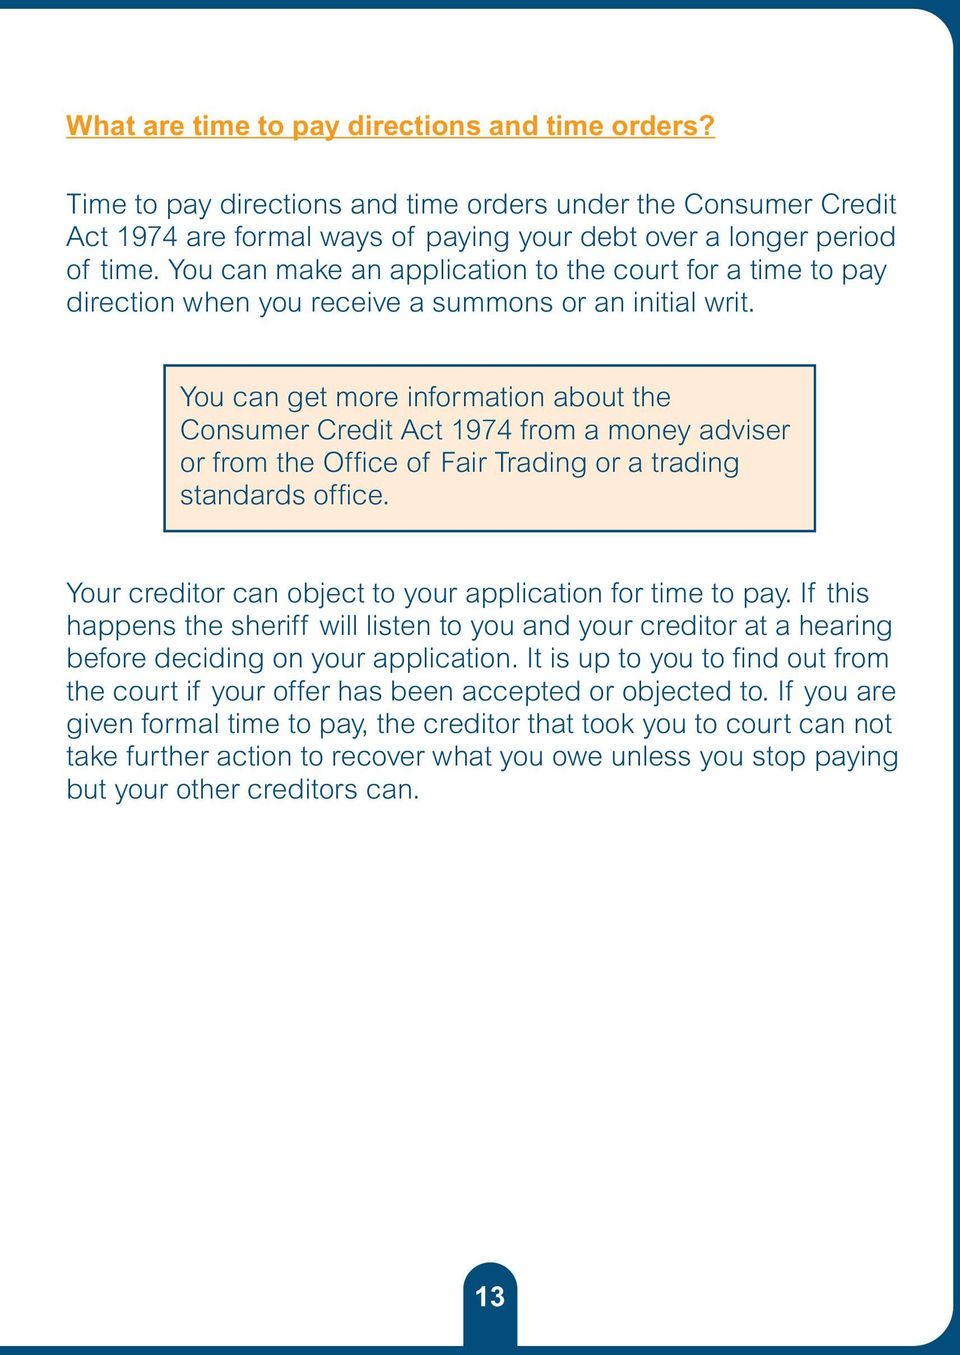 You can get more information about the Consumer Credit Act 1974 from a money adviser or from the Office of Fair Trading or a trading standards office.